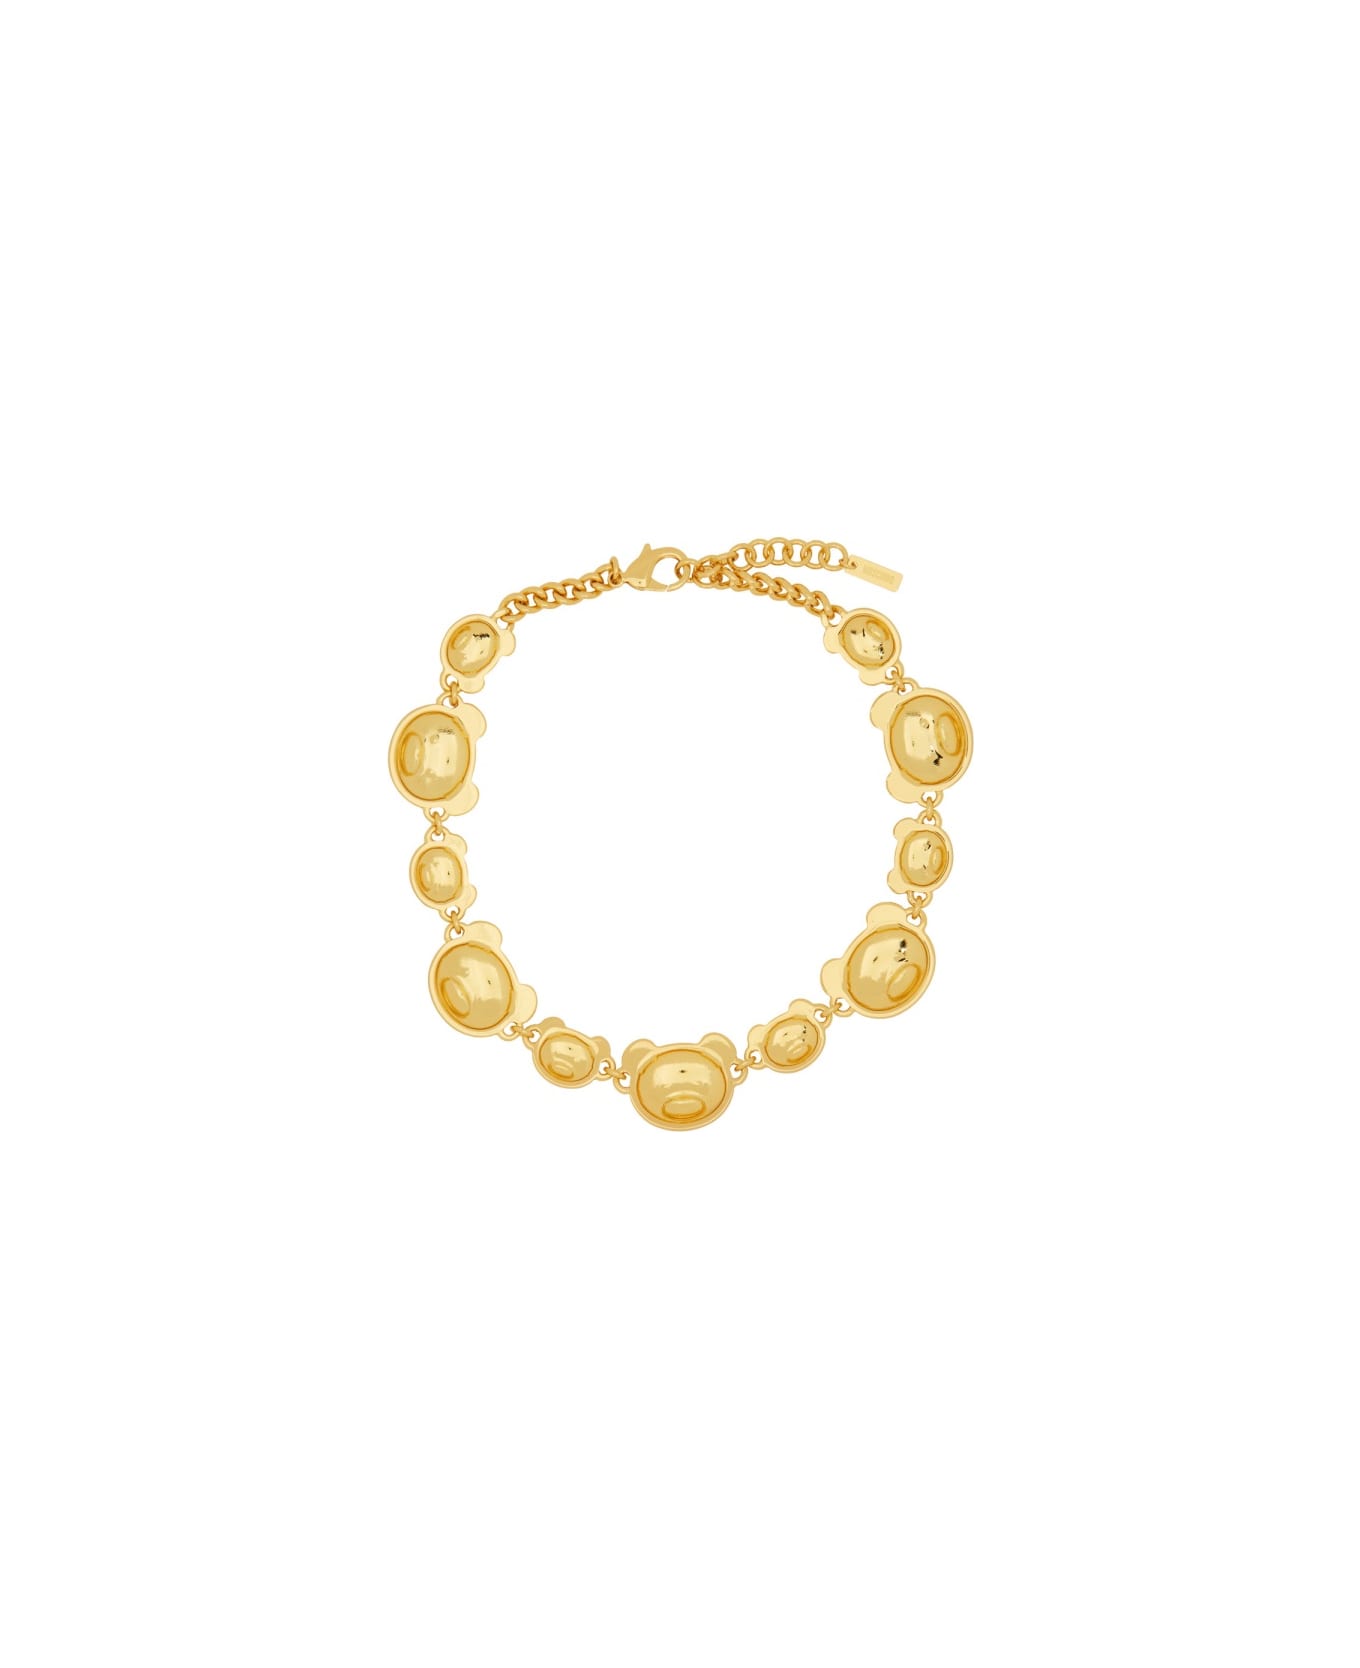 Moschino "teddy" Necklace - GOLD